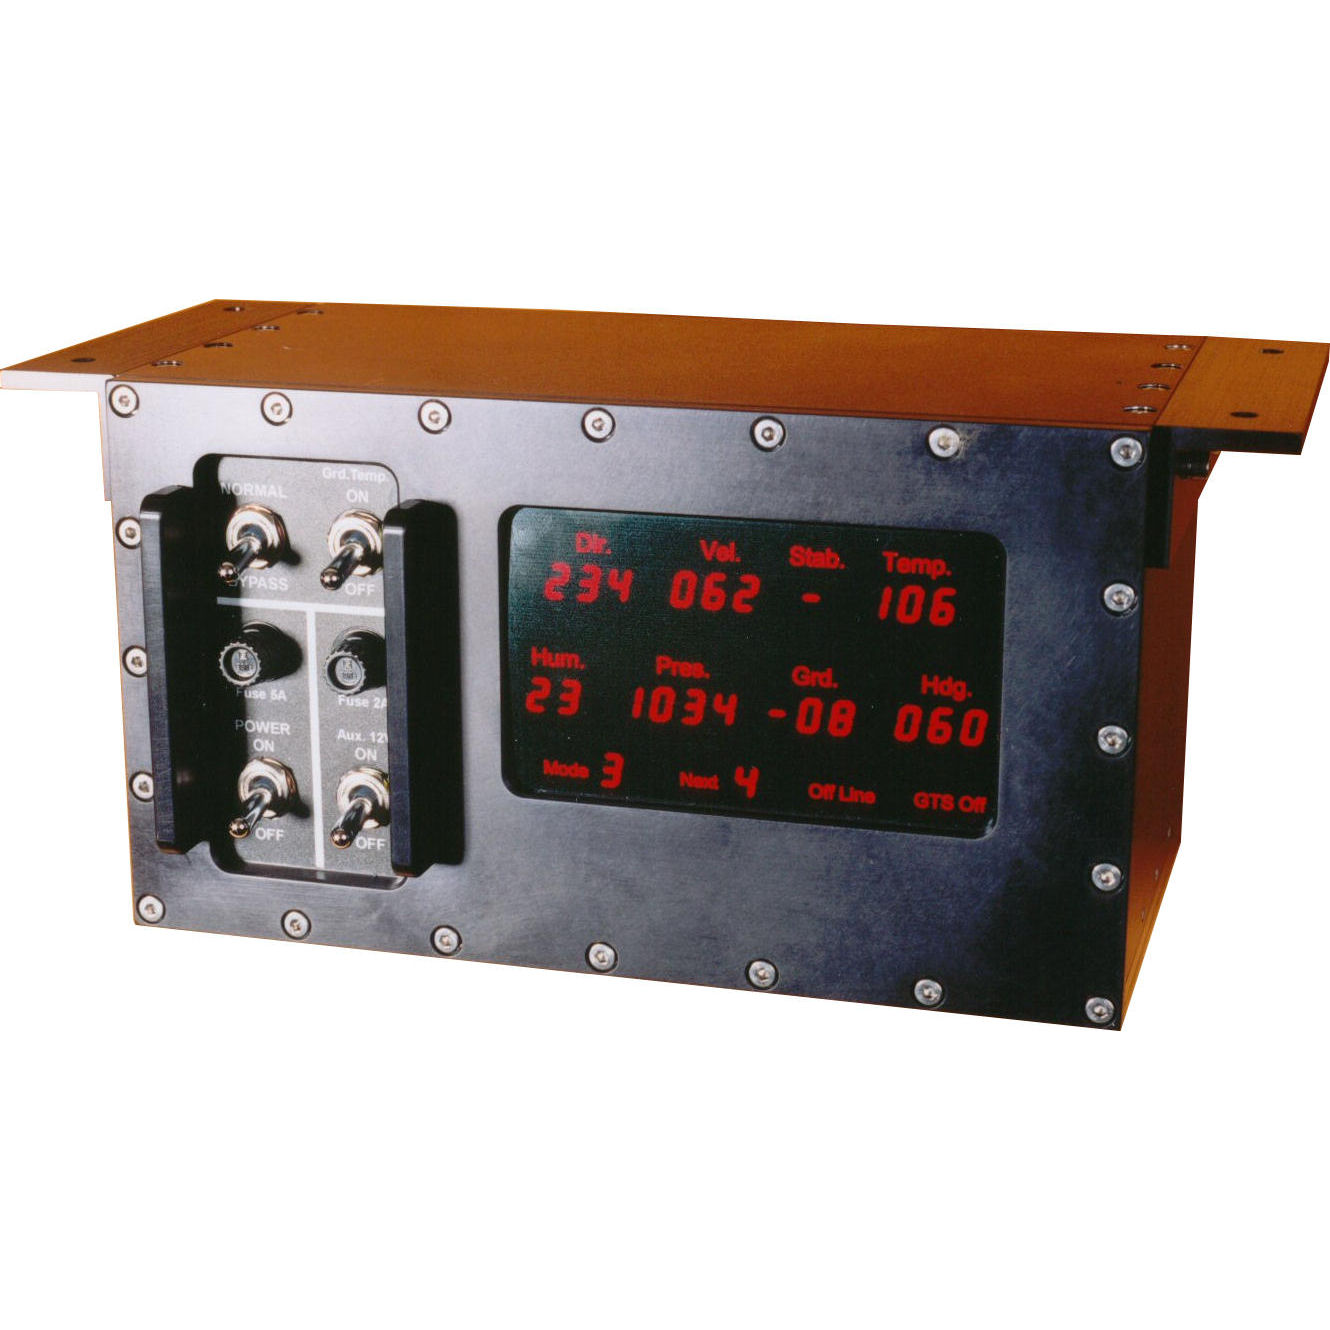 Meteorological data display unit for which Martech designed an interface